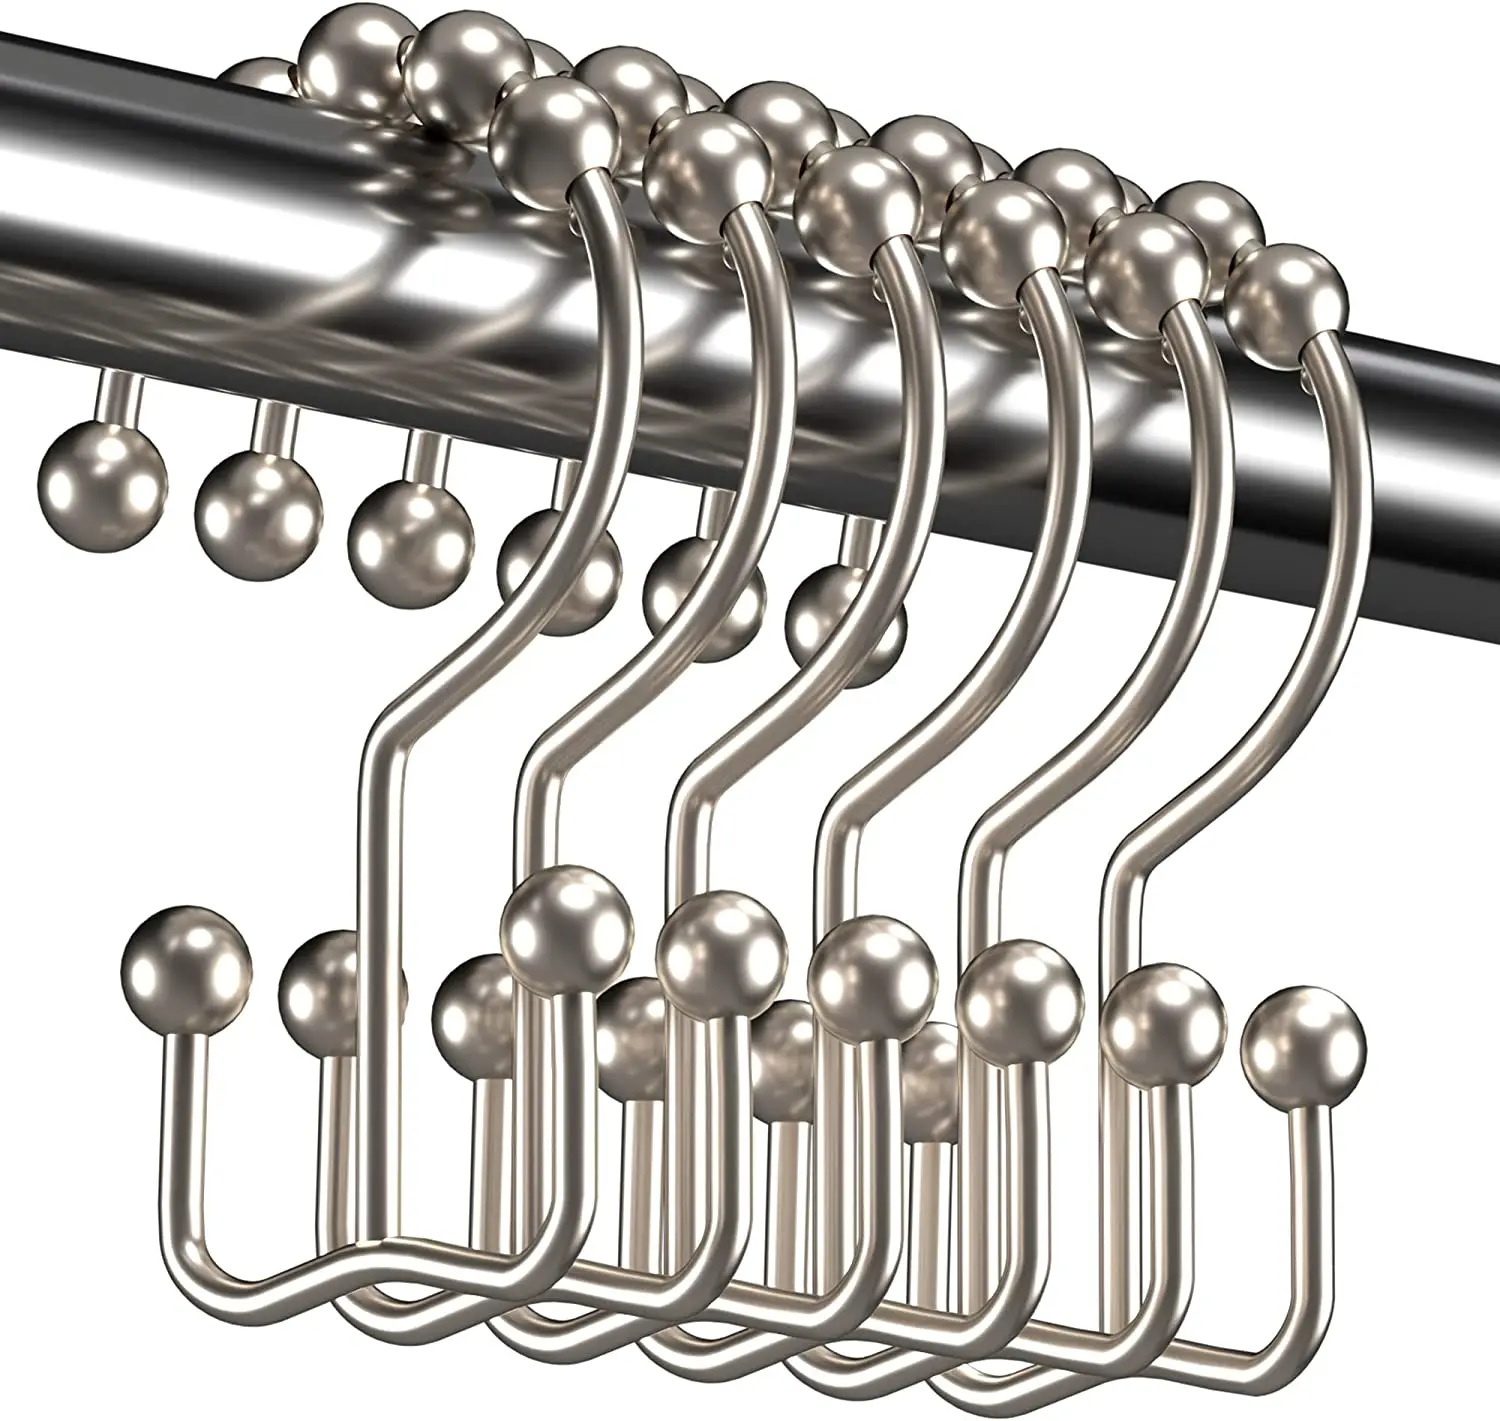 Shower Curtain Hooks, Shower Curtain Rings Roller Polished Satin Nickel Ball 12 pcs/pack Rustproof